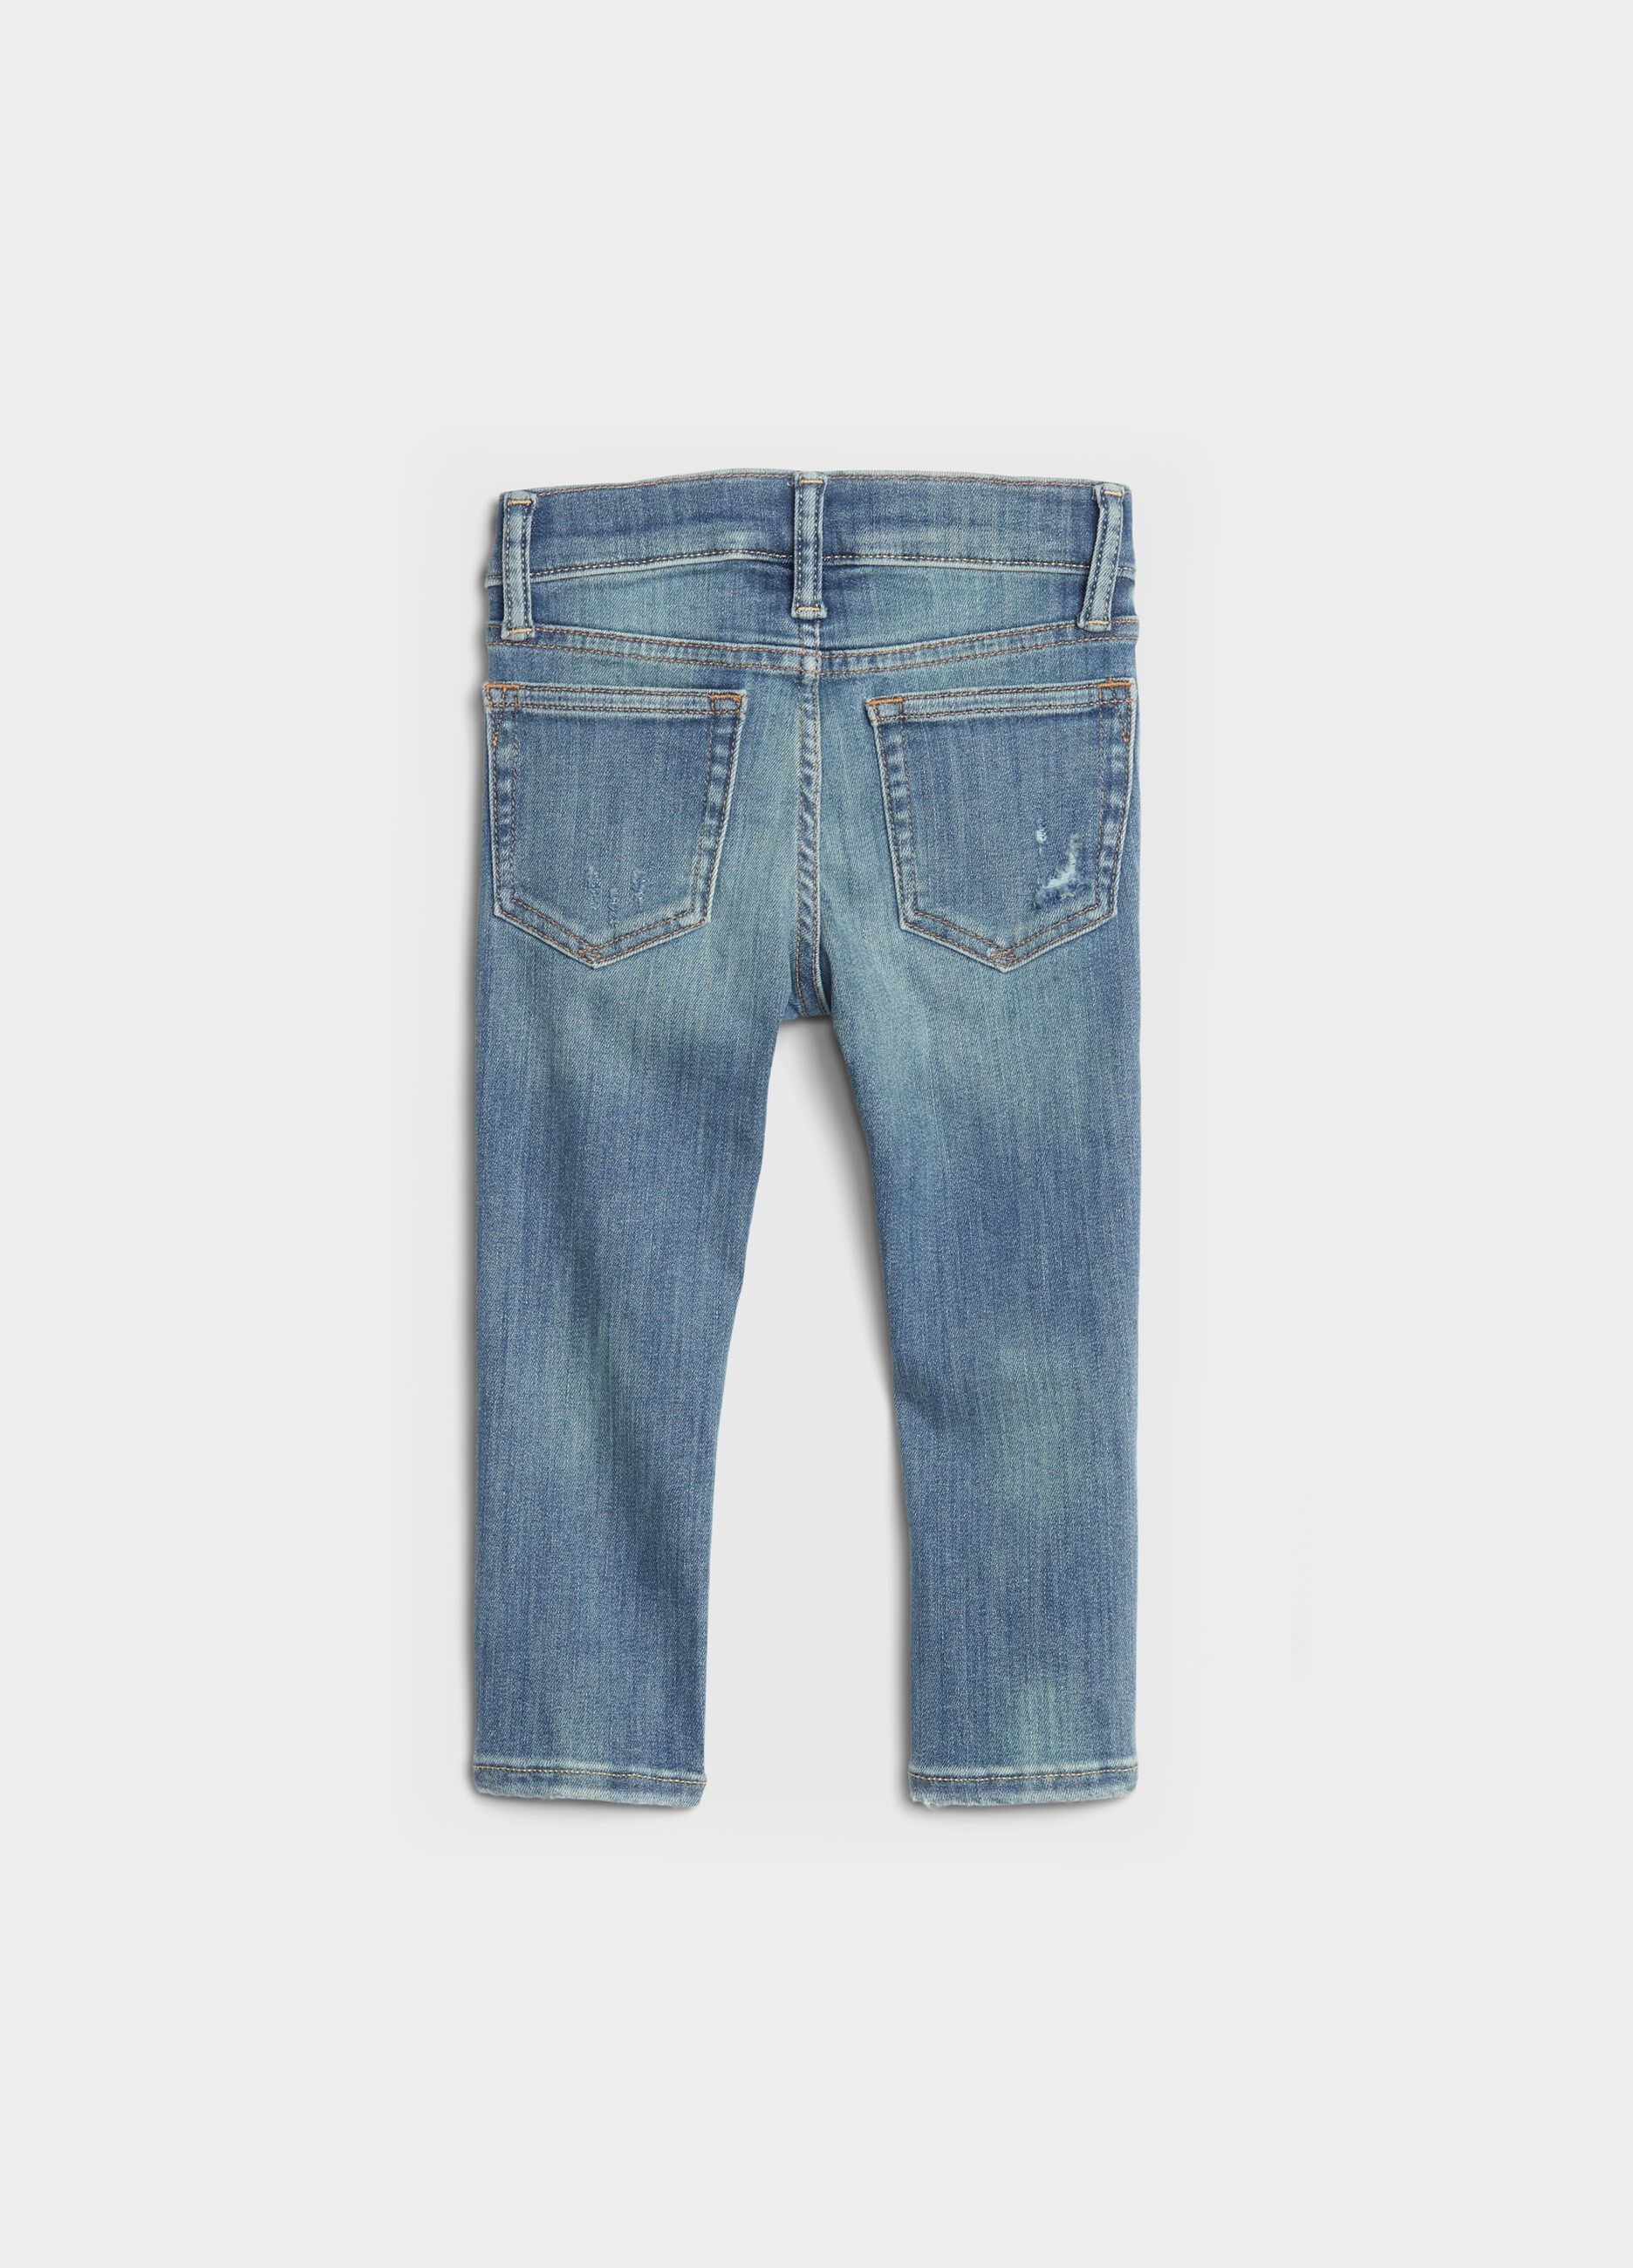 Jeans with abrasions